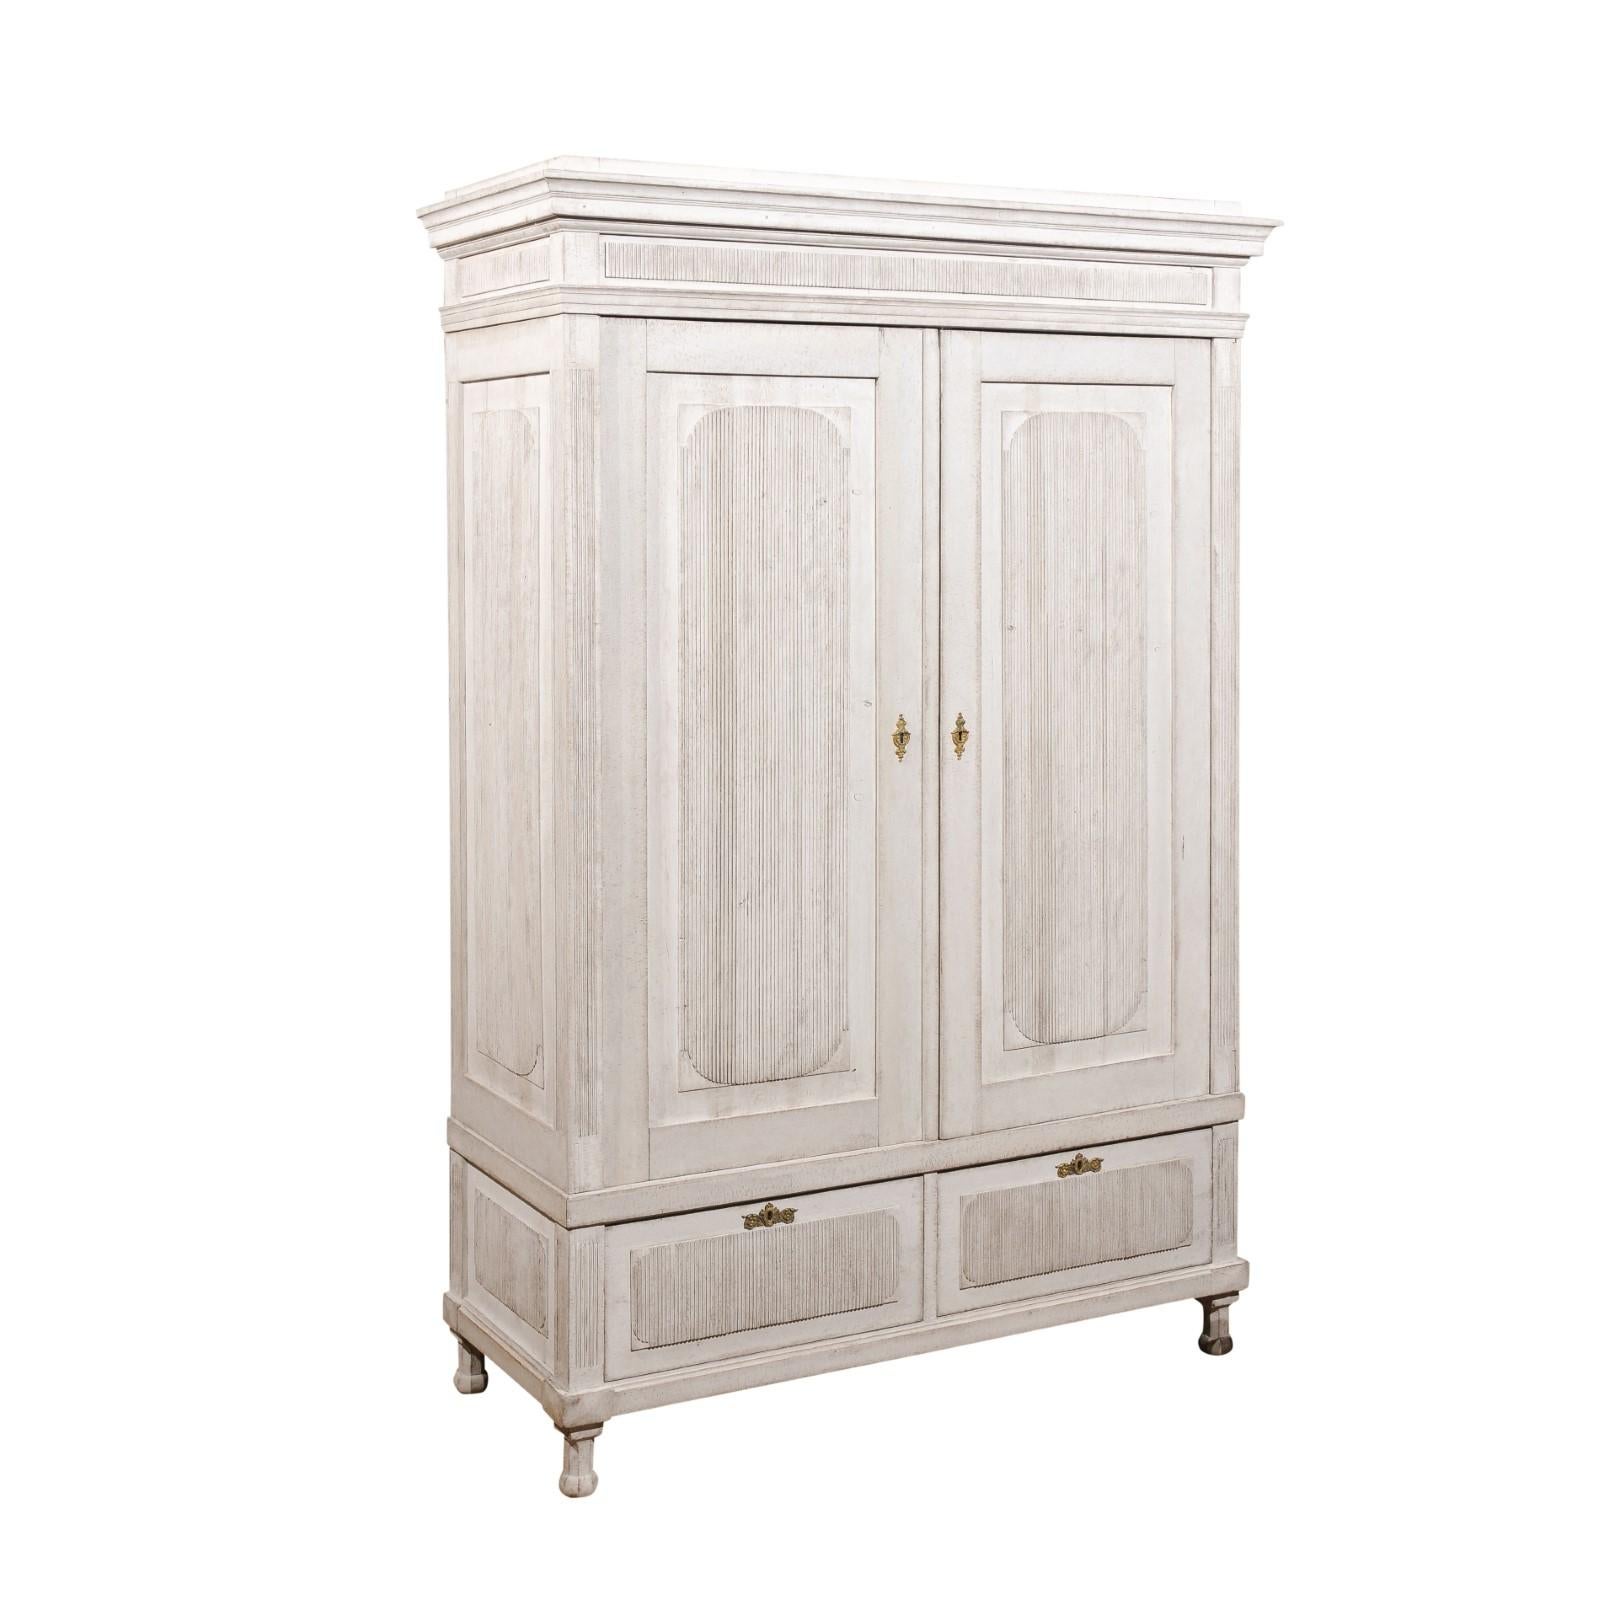 A Scandinavian painted wood wardrobe from the 19th century, with two doors, two drawers, reeded motifs and brass hardware. Made in Scandinavia during the 19th century, this stunning wardrobe features a beveled cornice sitting above two large doors